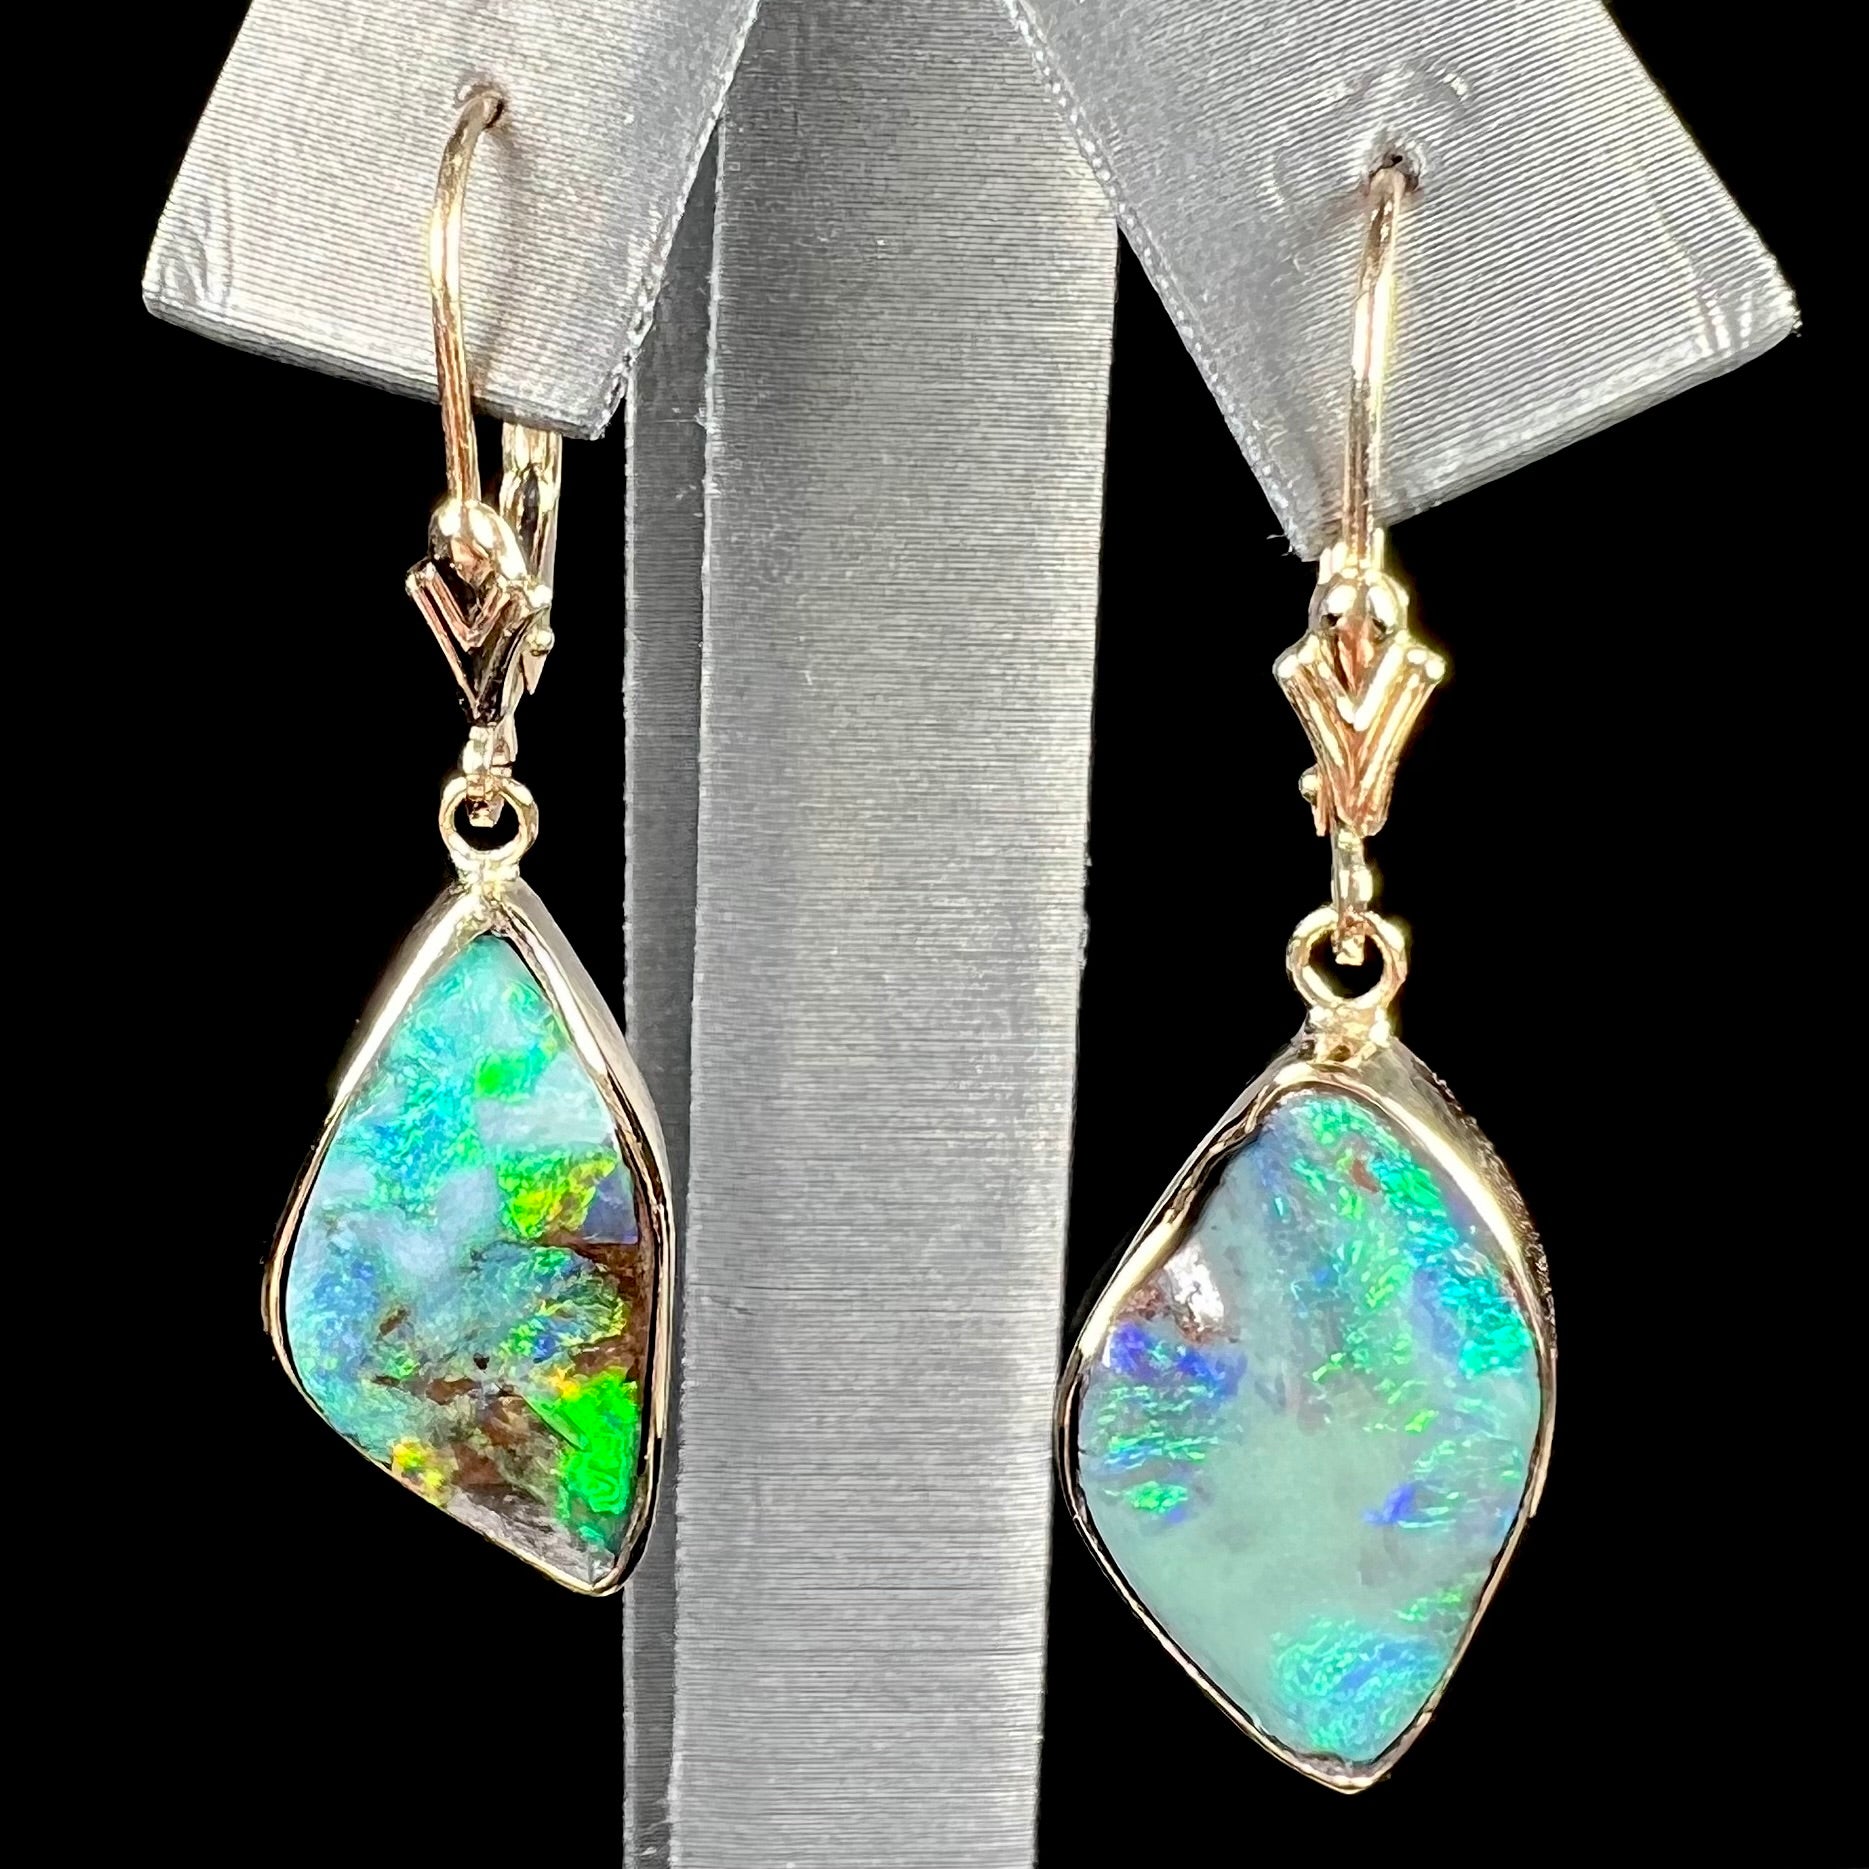 A pair of yellow gold dangle earrings set with Australian boulder opal stones.